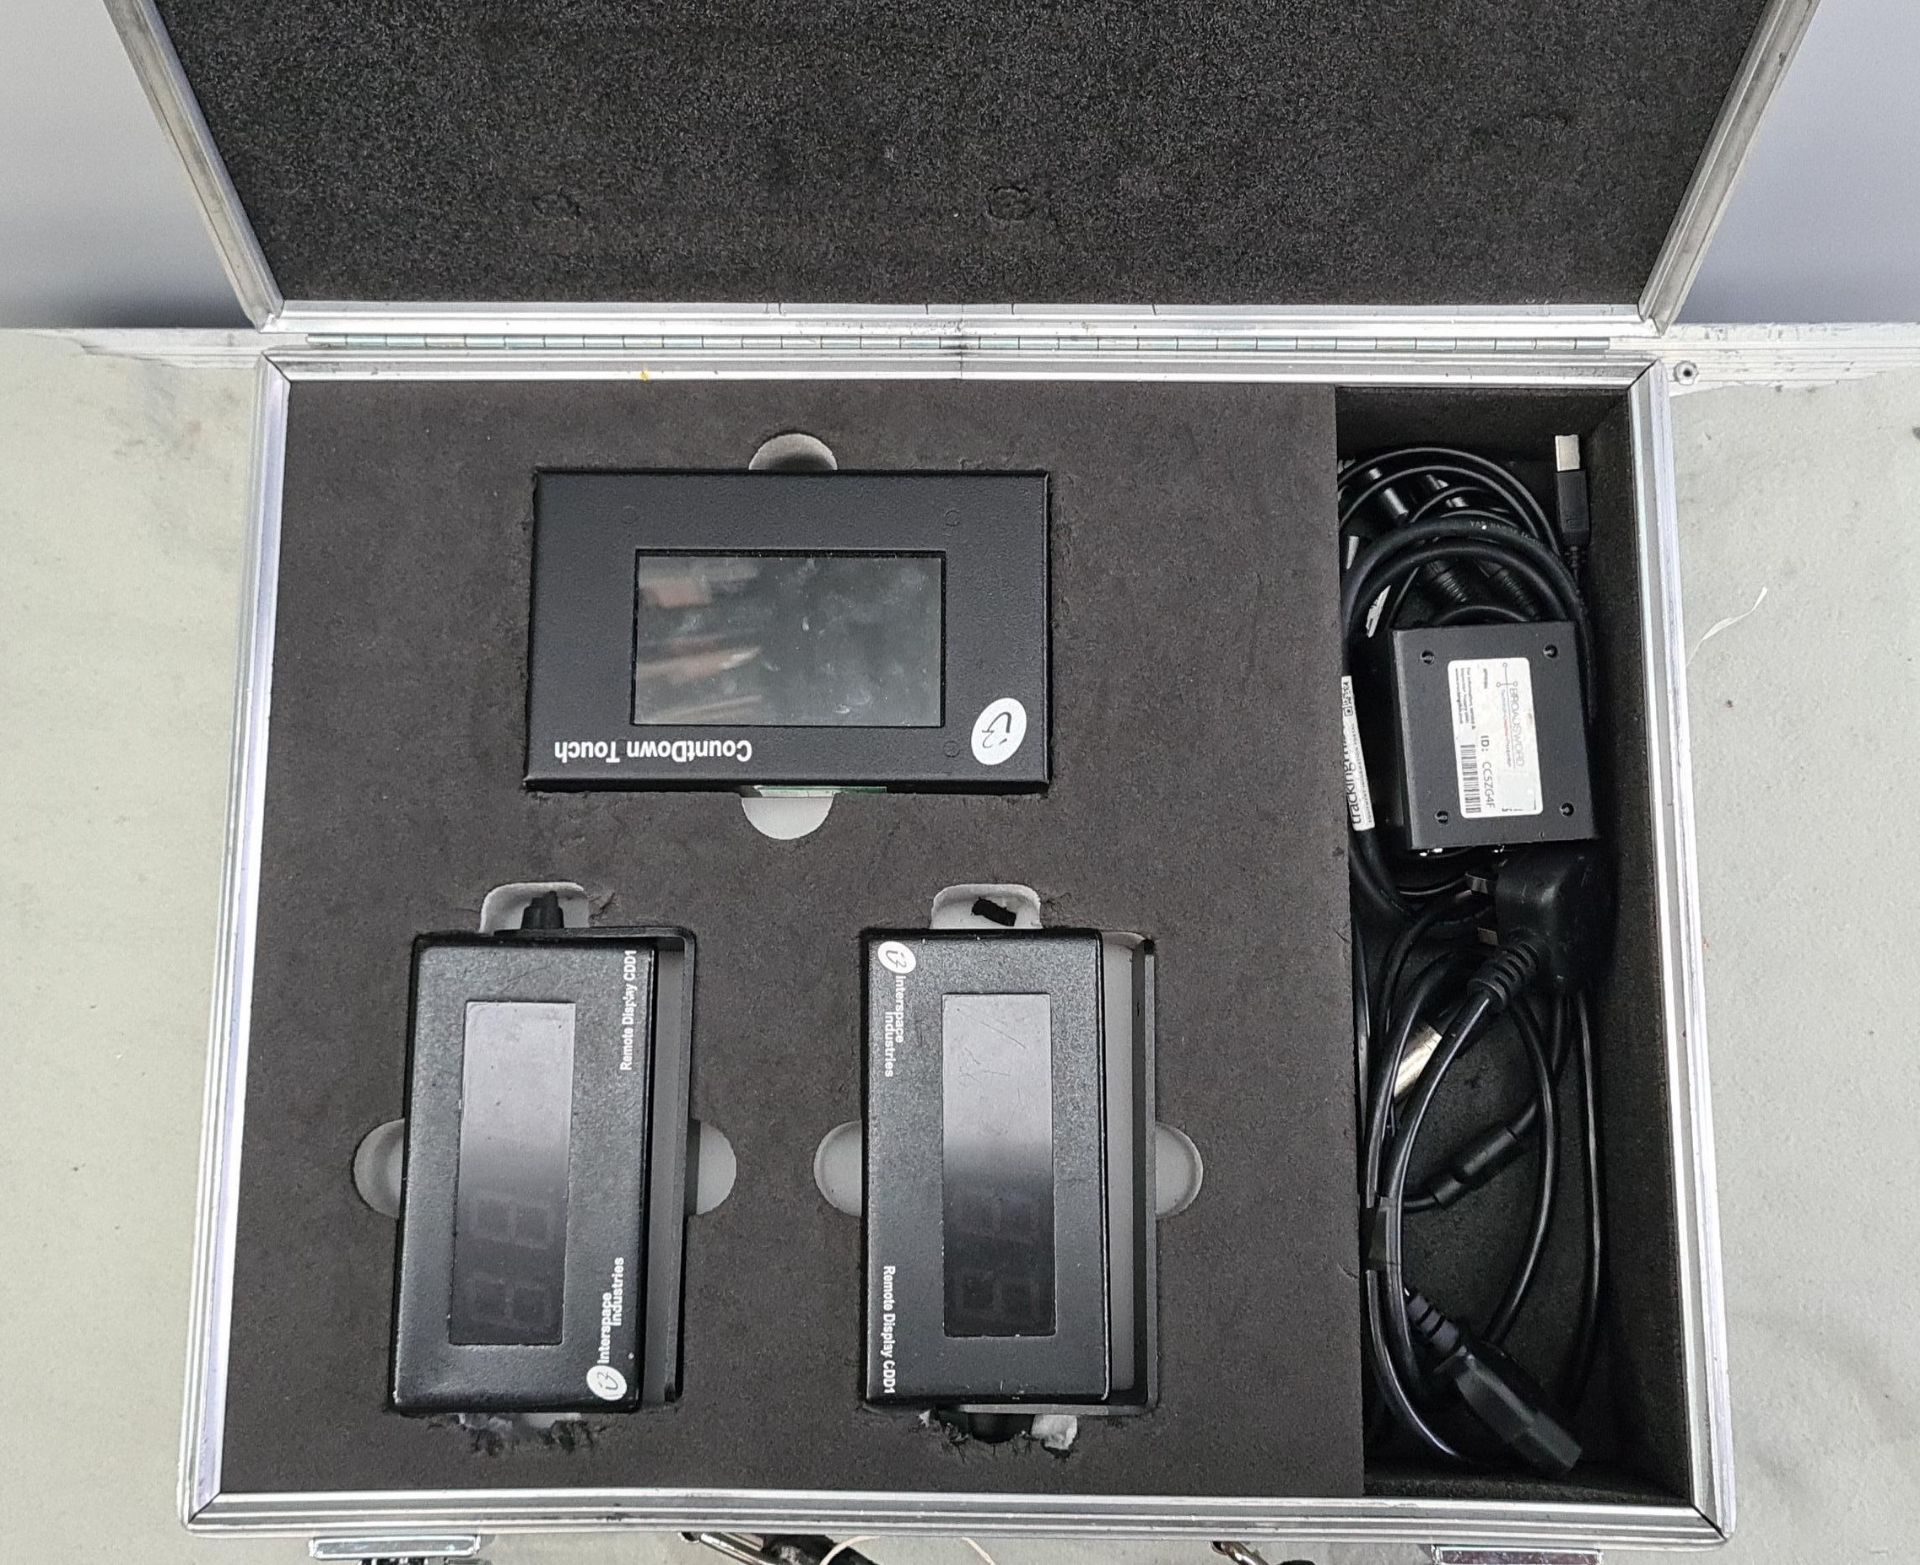 An Interspace Industries Countdown Touch Timer with Interspace flightcase, 2 CDD1 remote timer